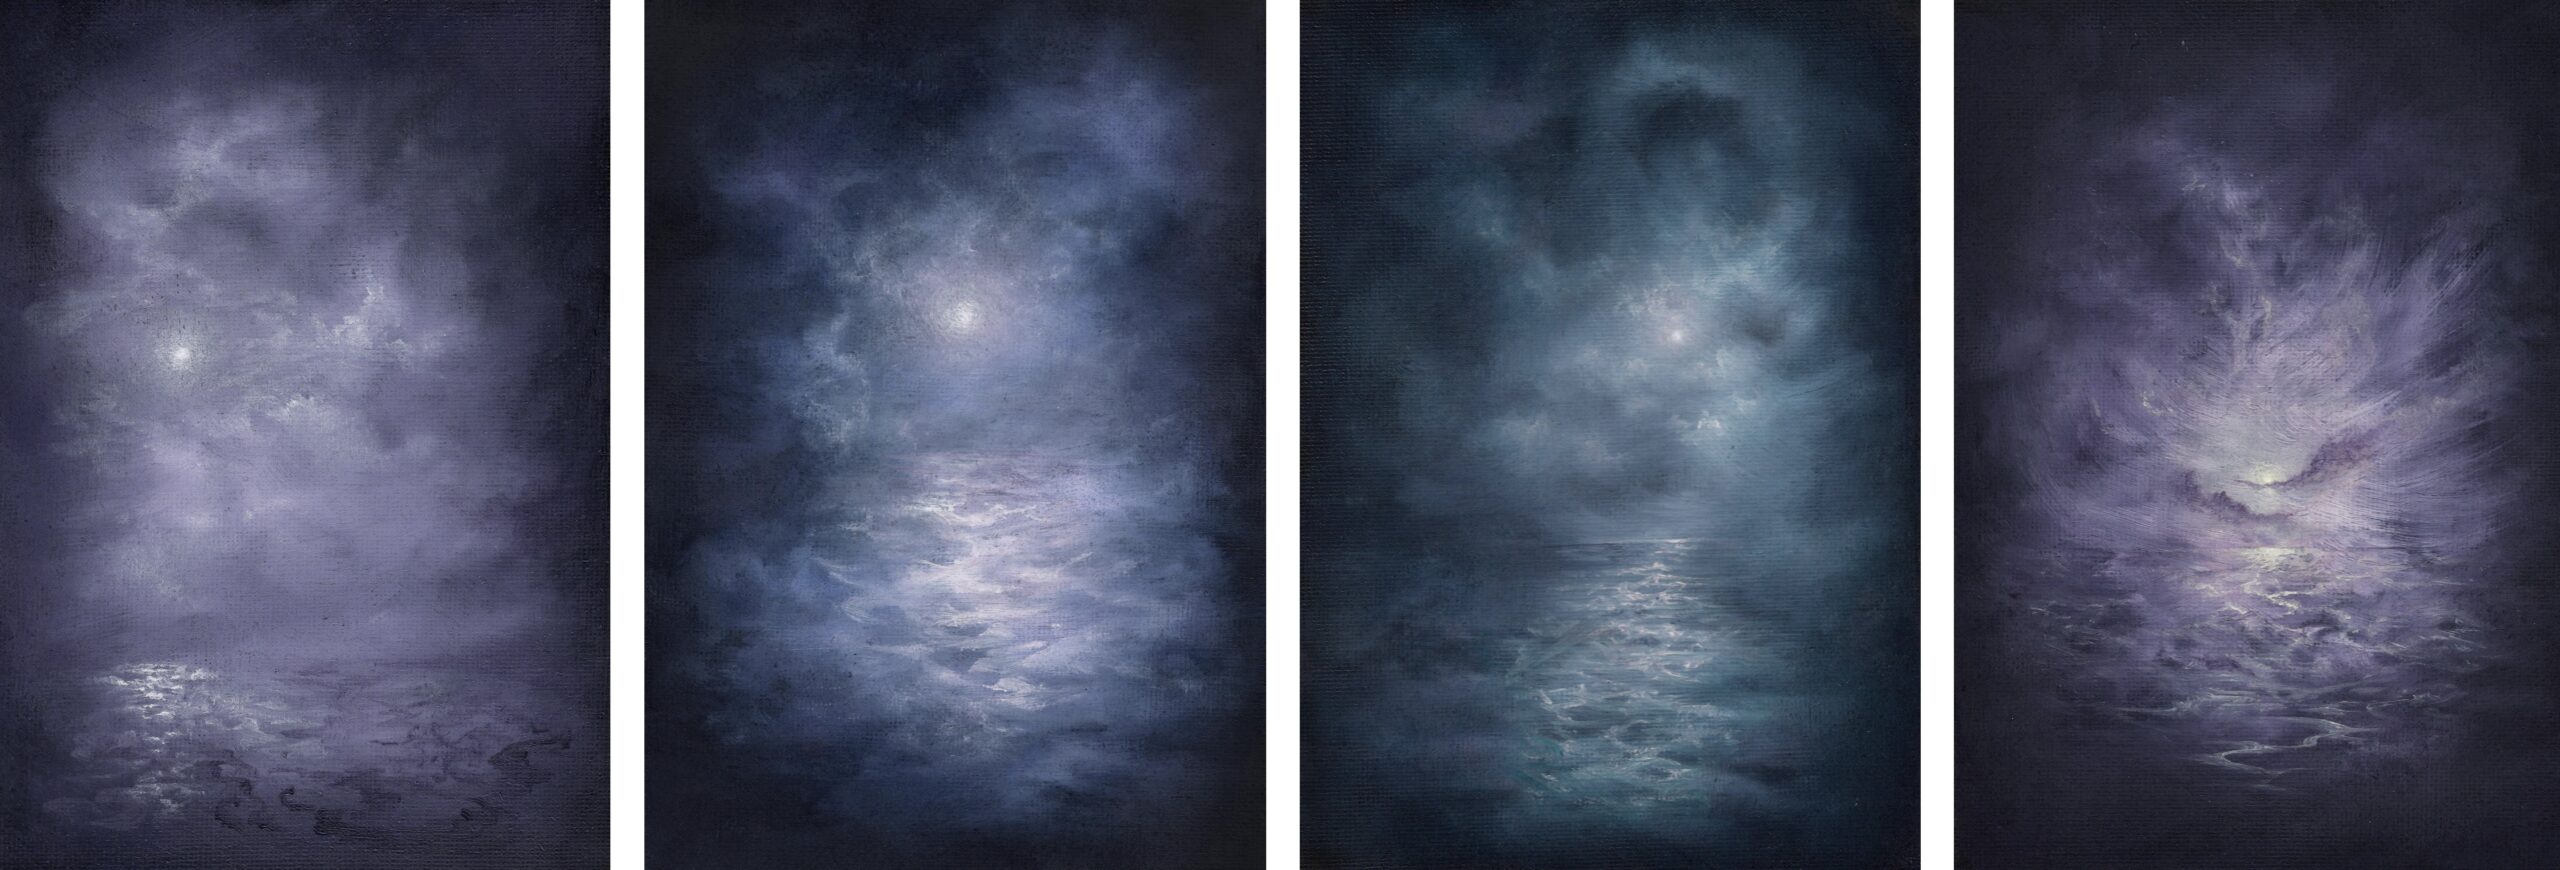 Four small paintings, all featuring a full moon shining through mist, over calm but rippling water. Each painting uses different colours; lilac-grey, ultramarine, and emerald, with highlight of warm pinks and yellows in each. 